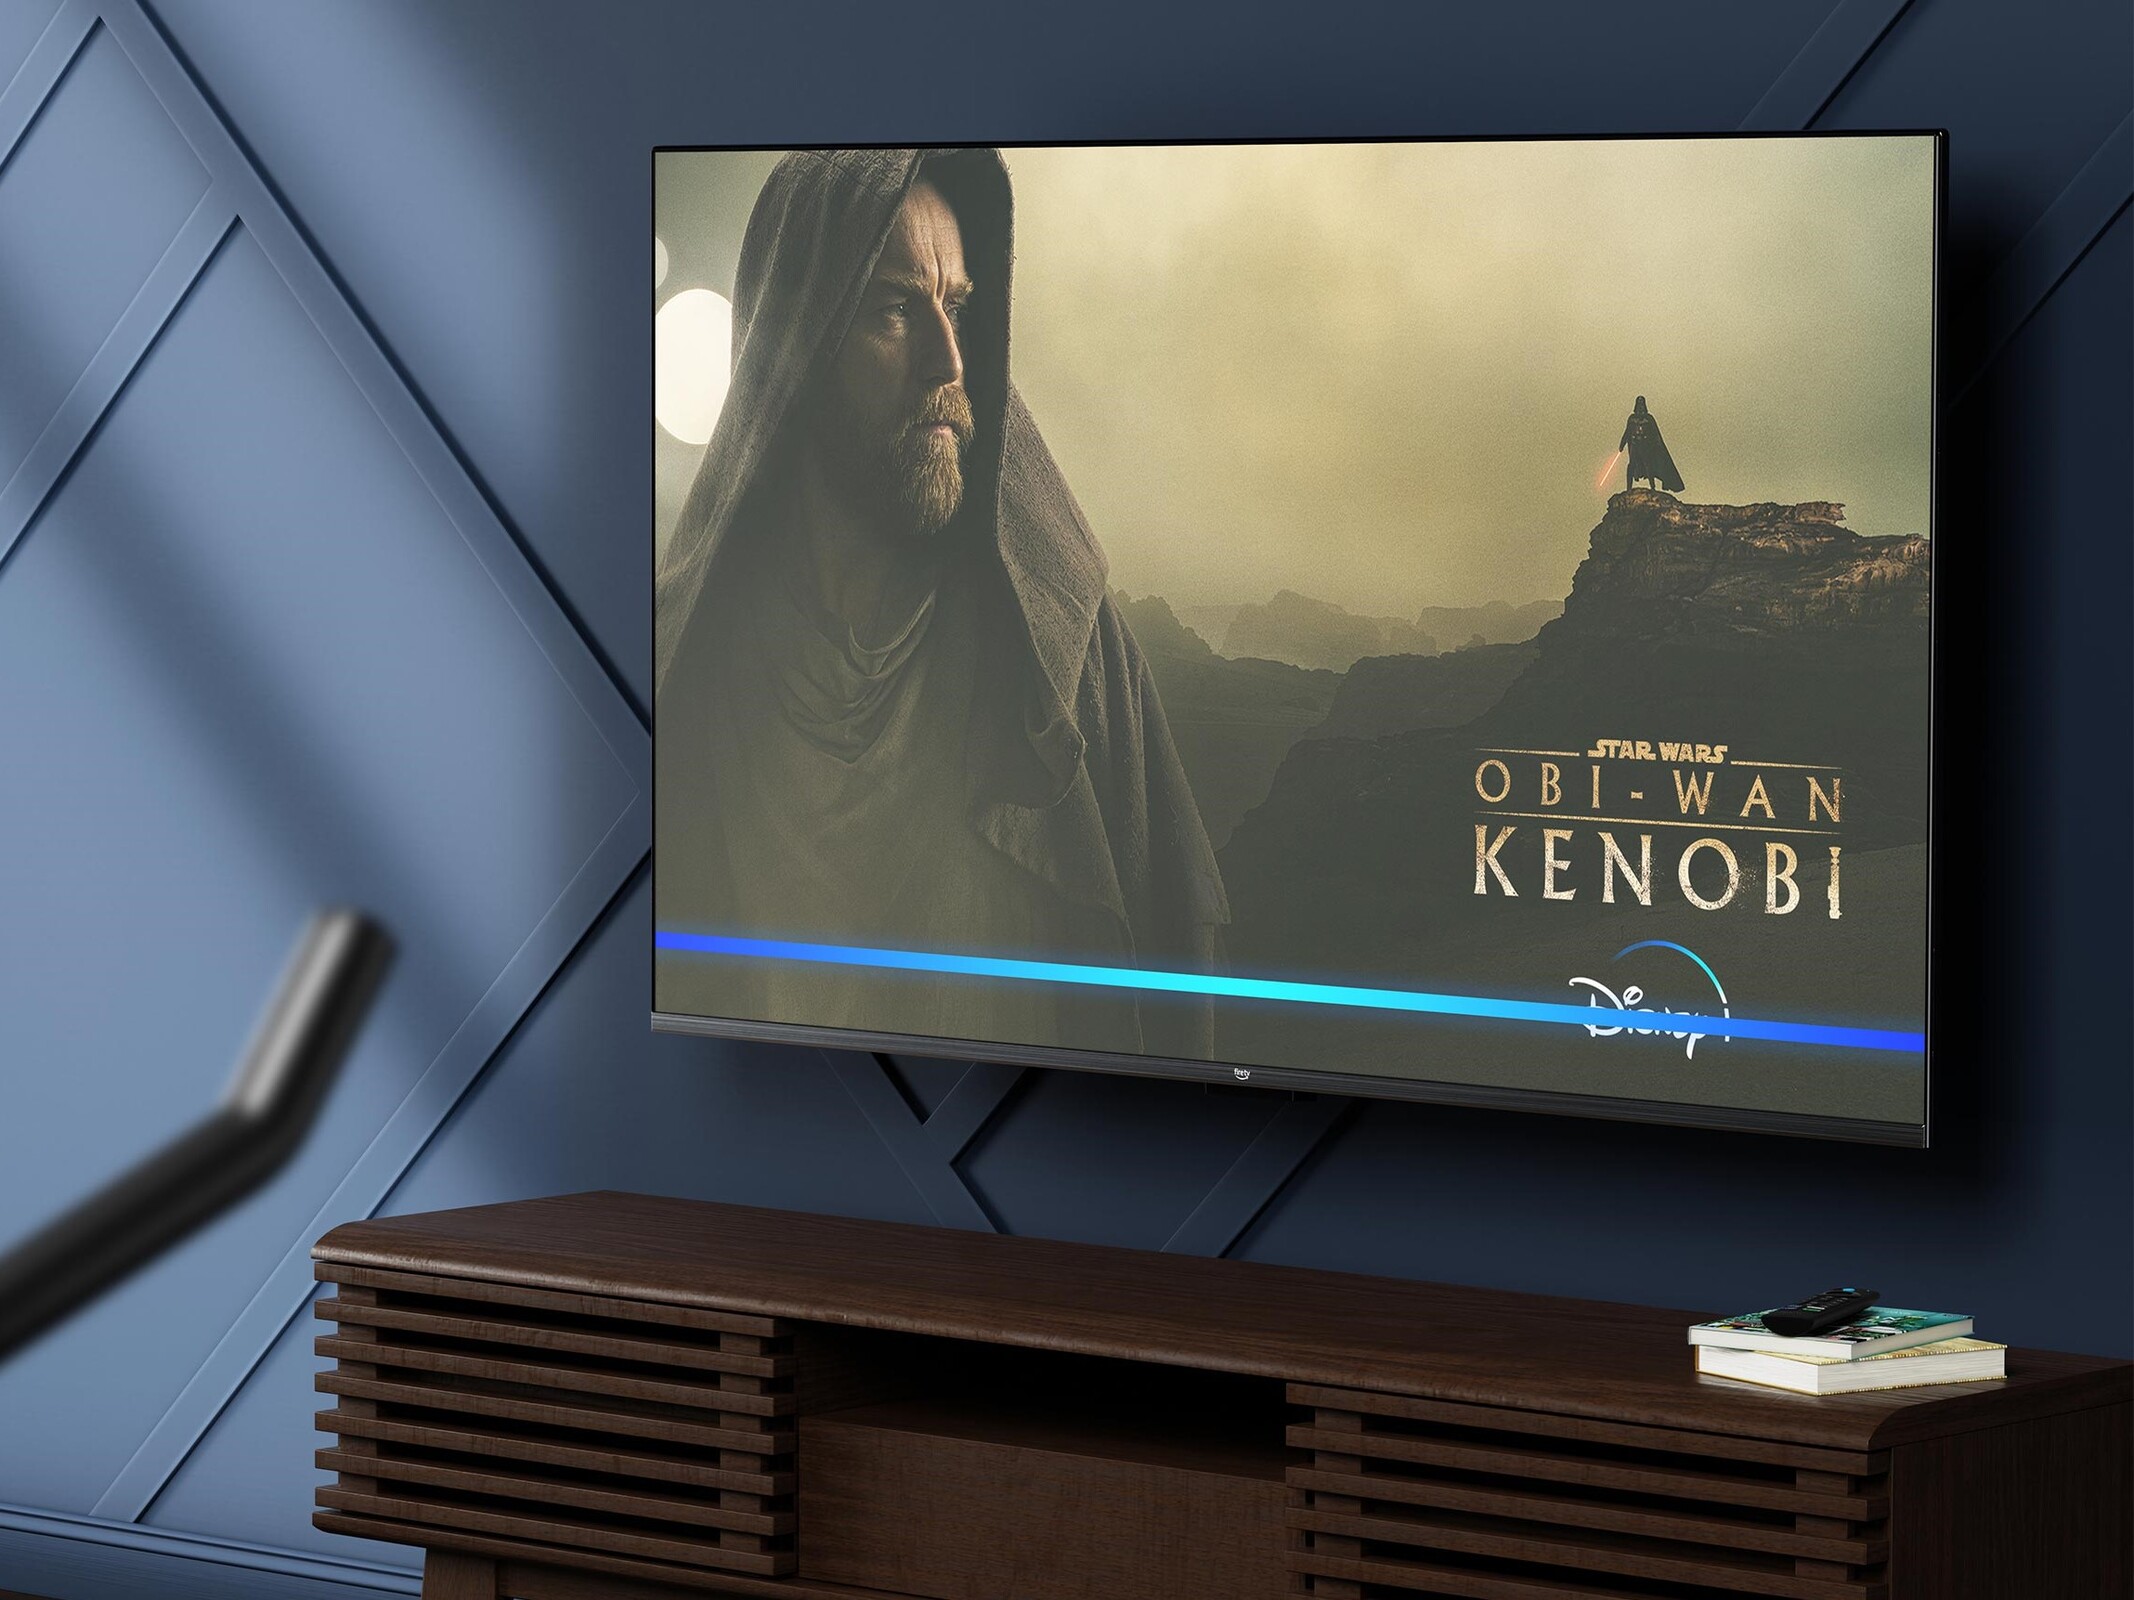 Launches Its First TVs: Fire TV Omni Series with 4K Ultra HD